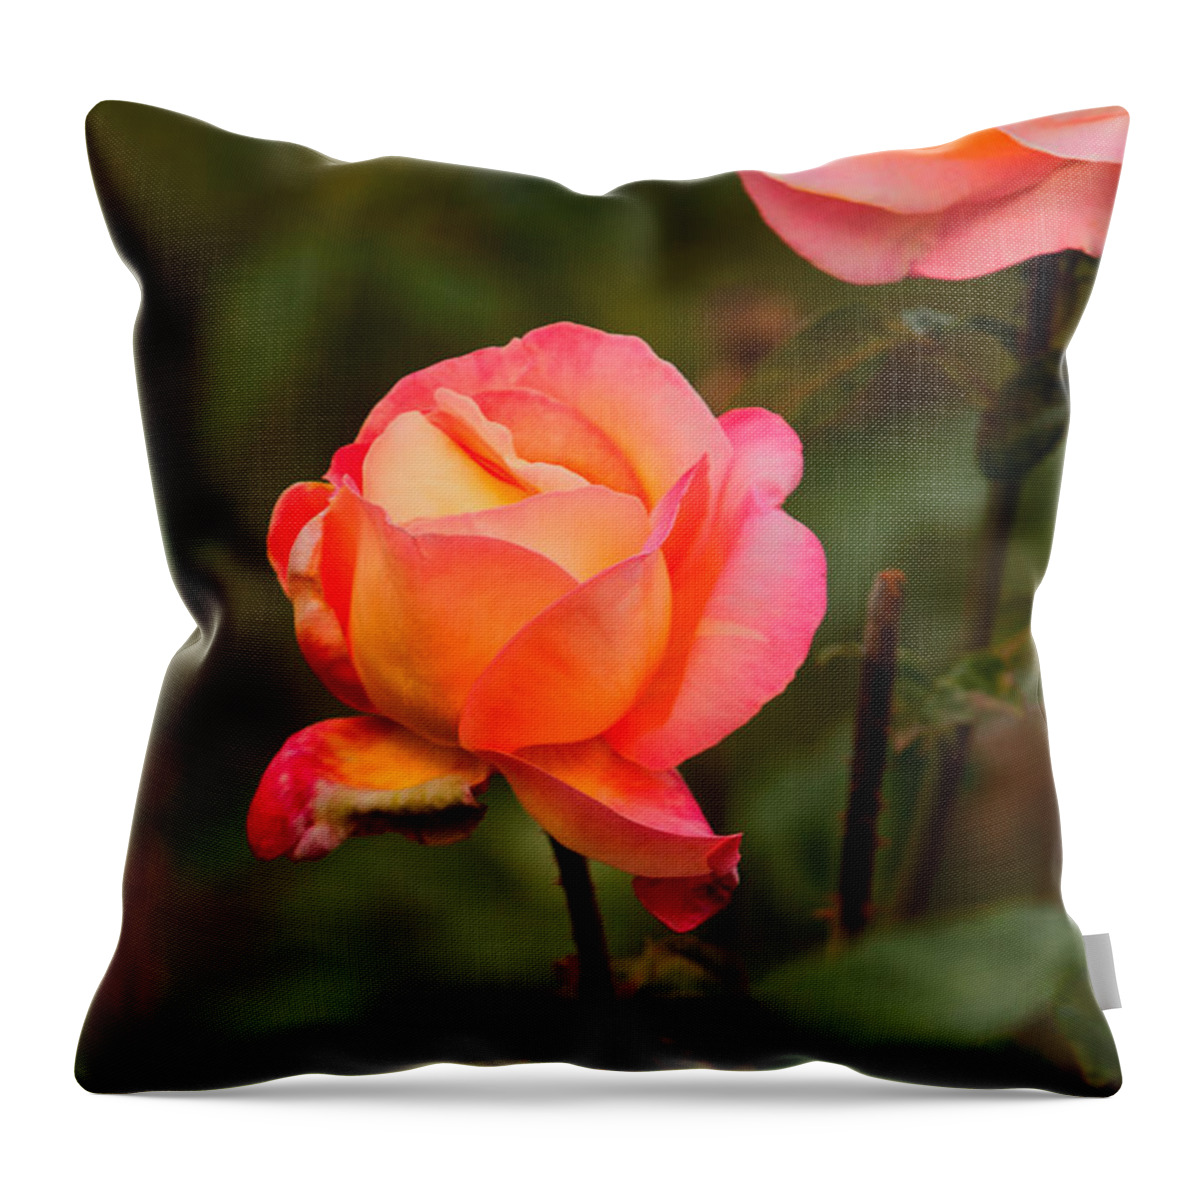 Brilliant Blooms Throw Pillow featuring the photograph Glowing Pair by Paul Mangold